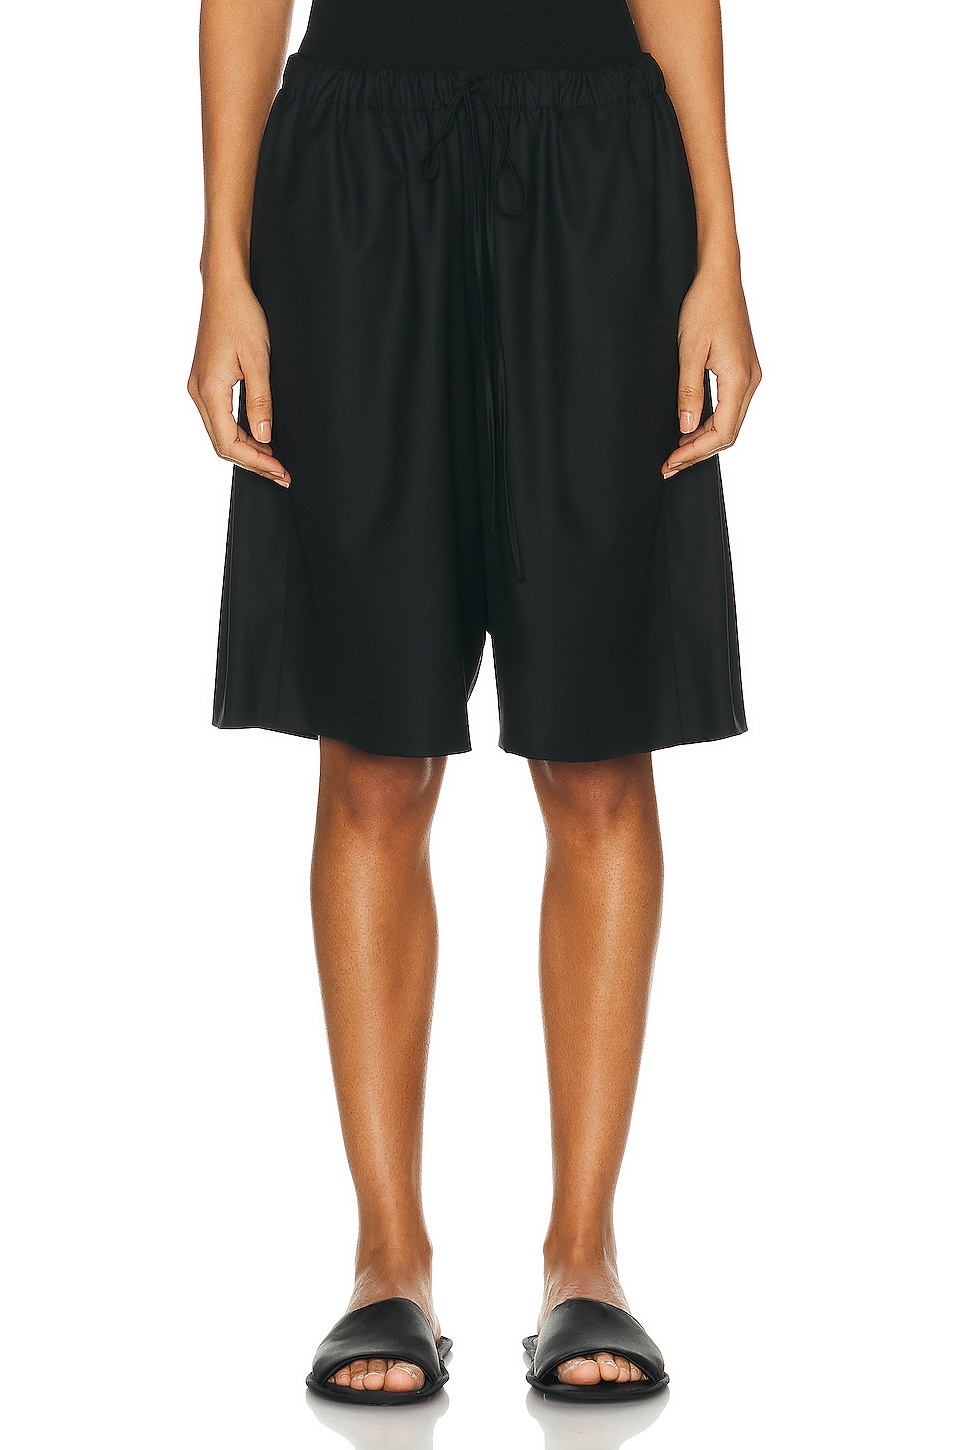 Image 1 of The Row Stanton Short in Black